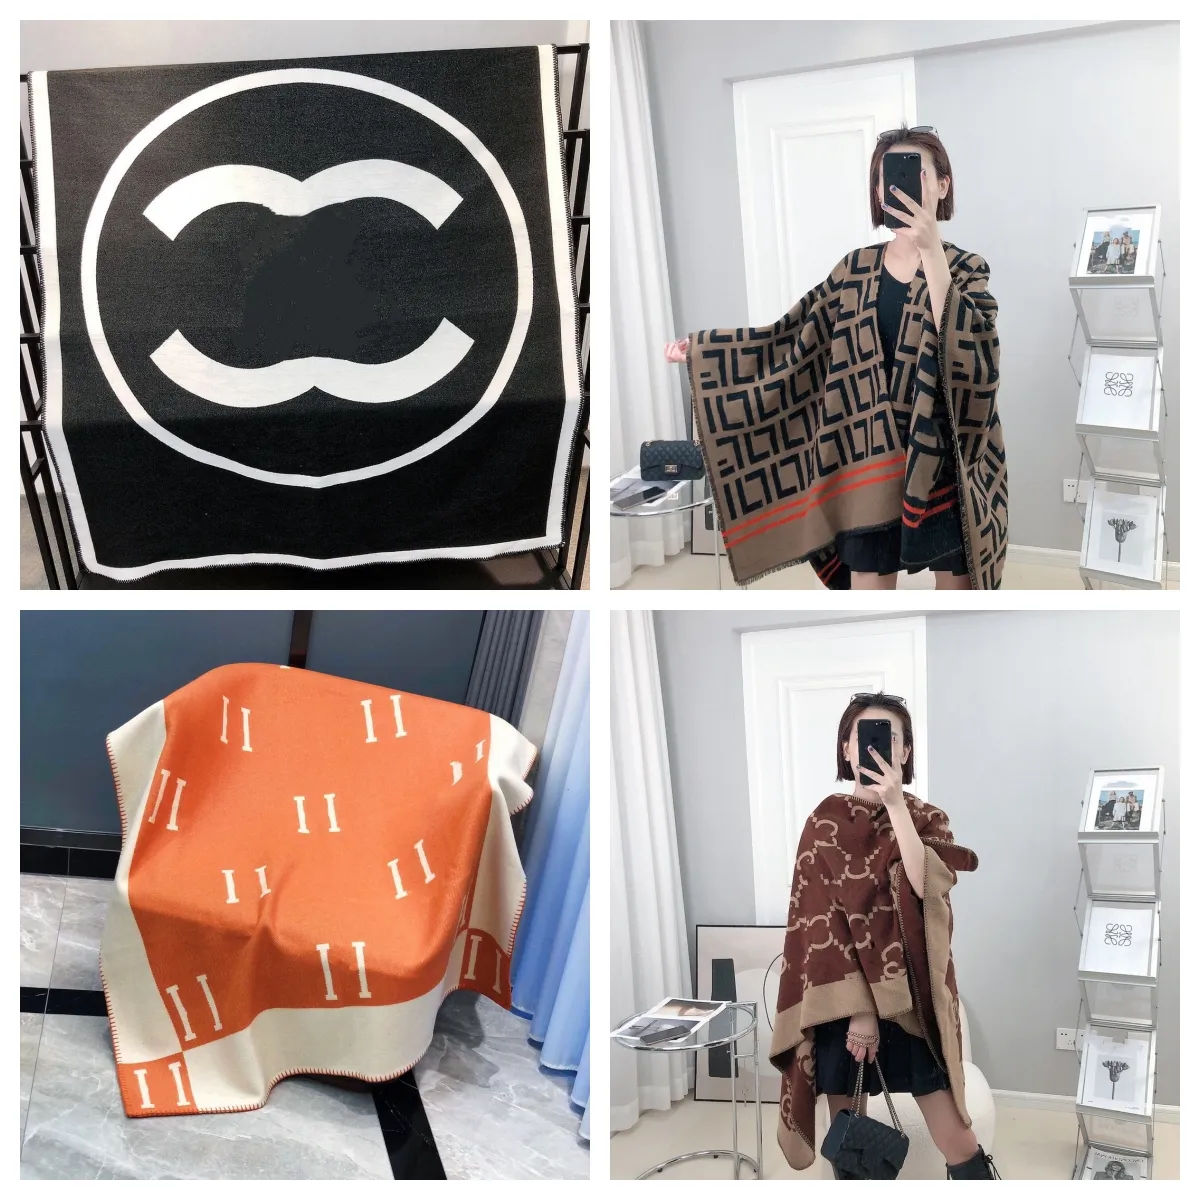 New Look Top Hot-selling Fashion Scarf Pashmina Shawls and Wraps for Evening Dresses Travel Office Winter Wedding Cashmere Feel Large Scarves Best Gift